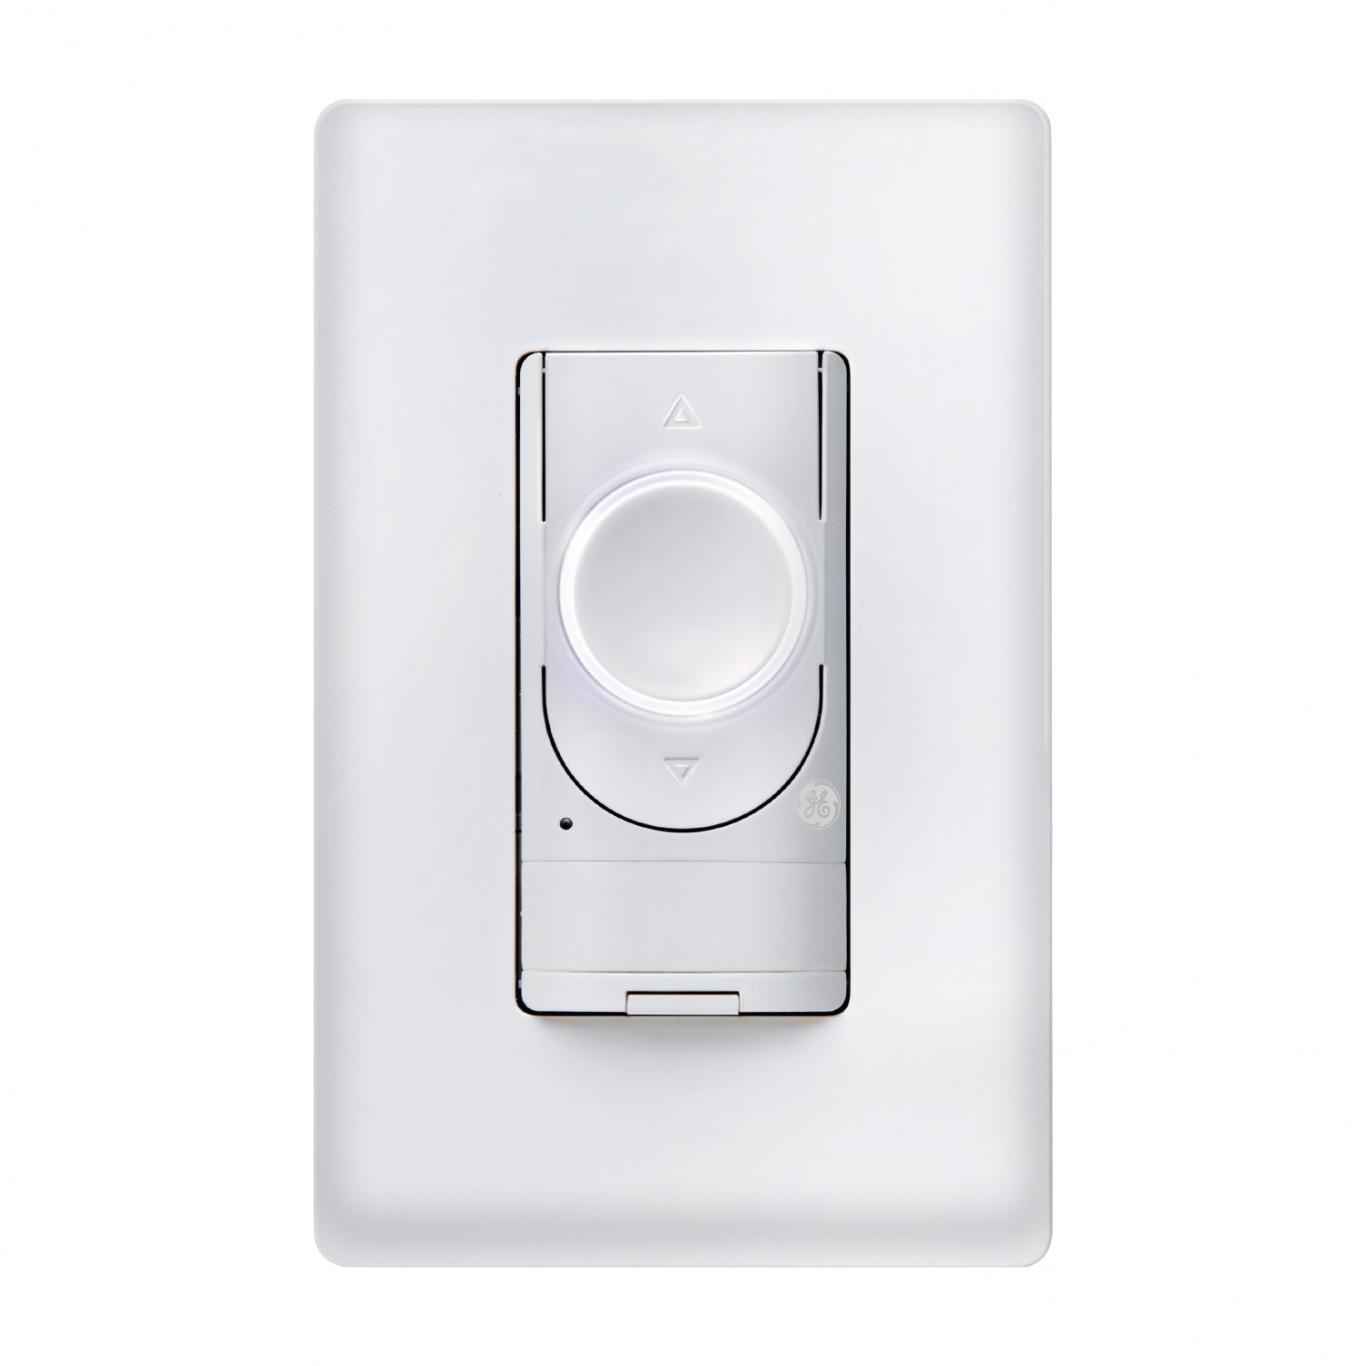 93101840 | Smart Switch Dimmer Button 4-wire With Neutral